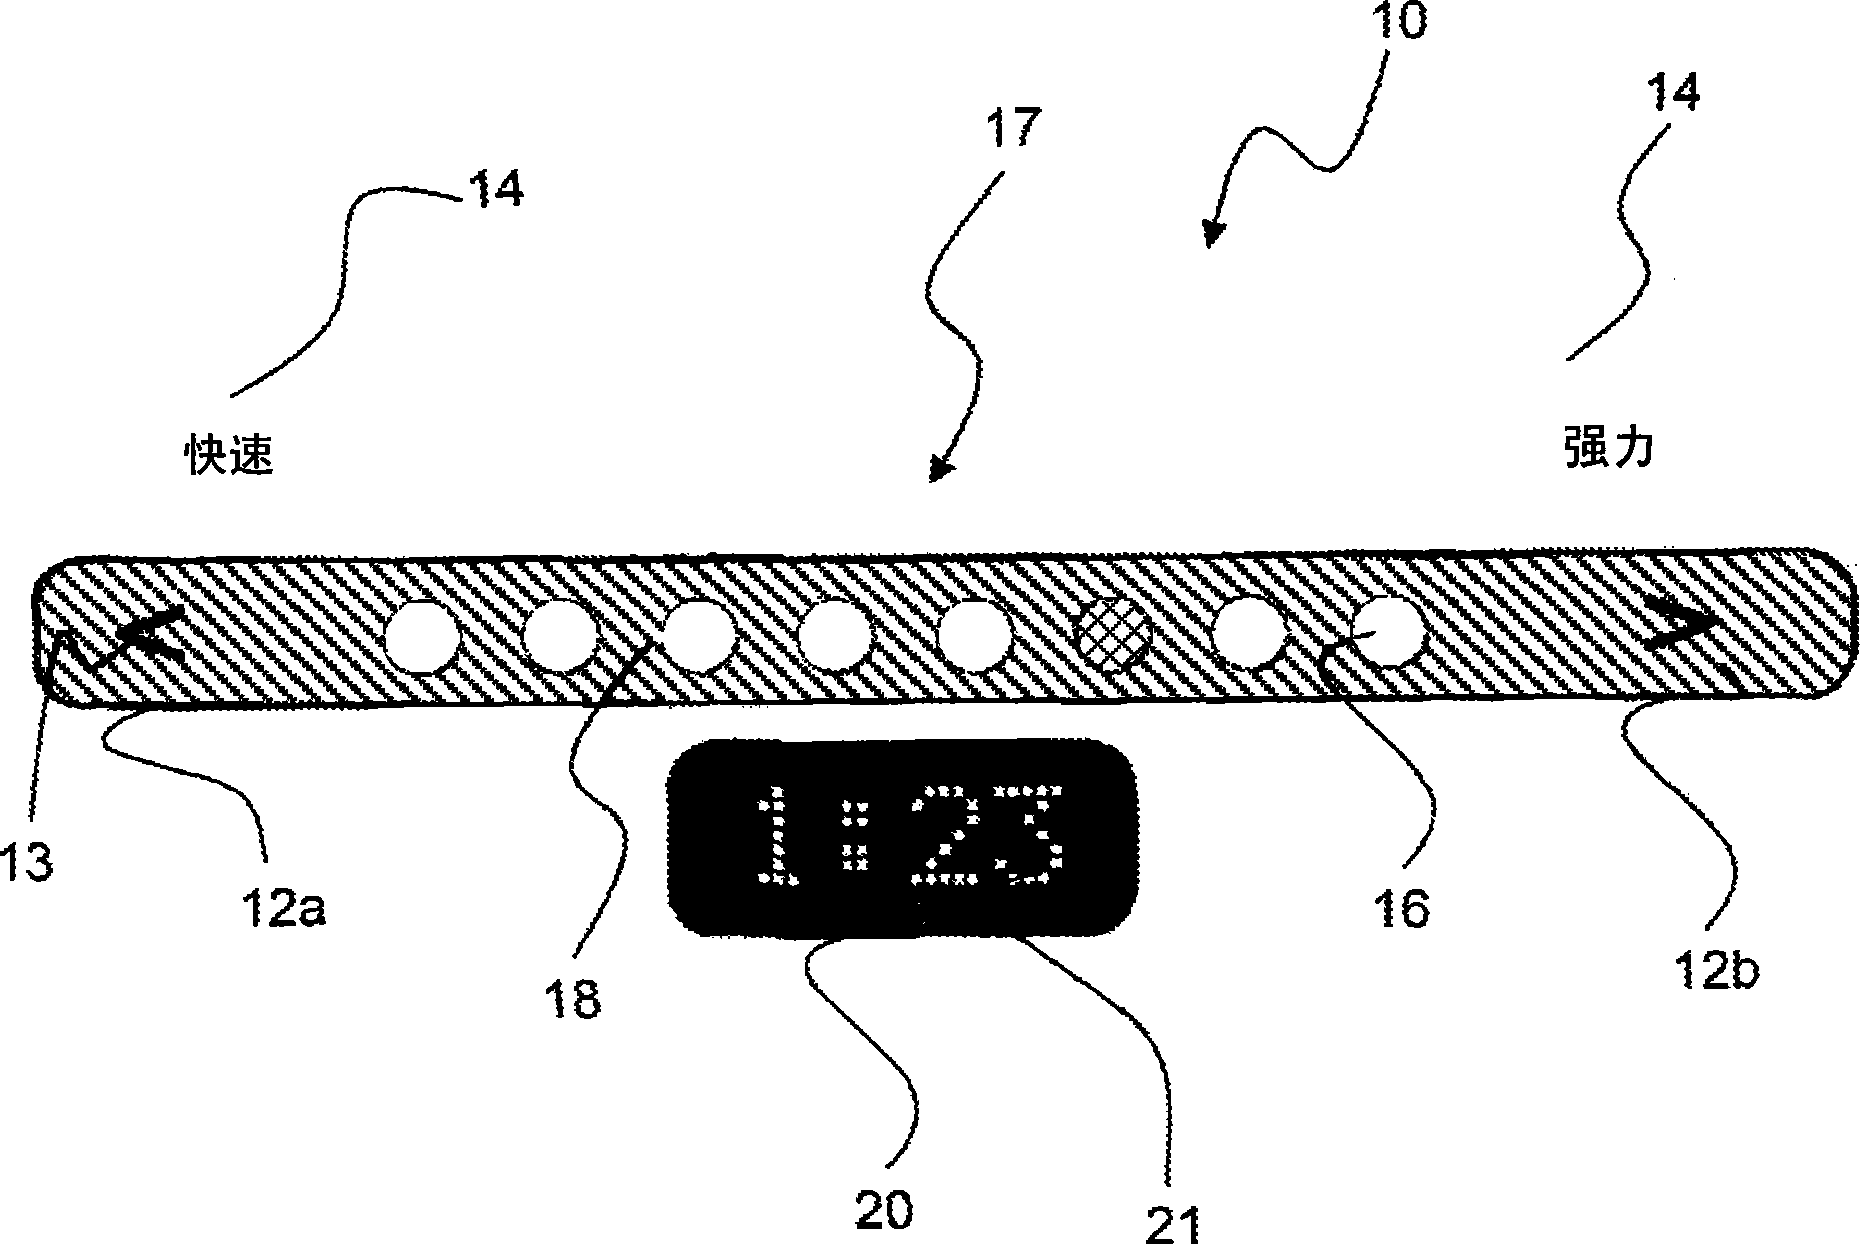 Laundry care appliance, and method for the operation of such a laundry care appliance